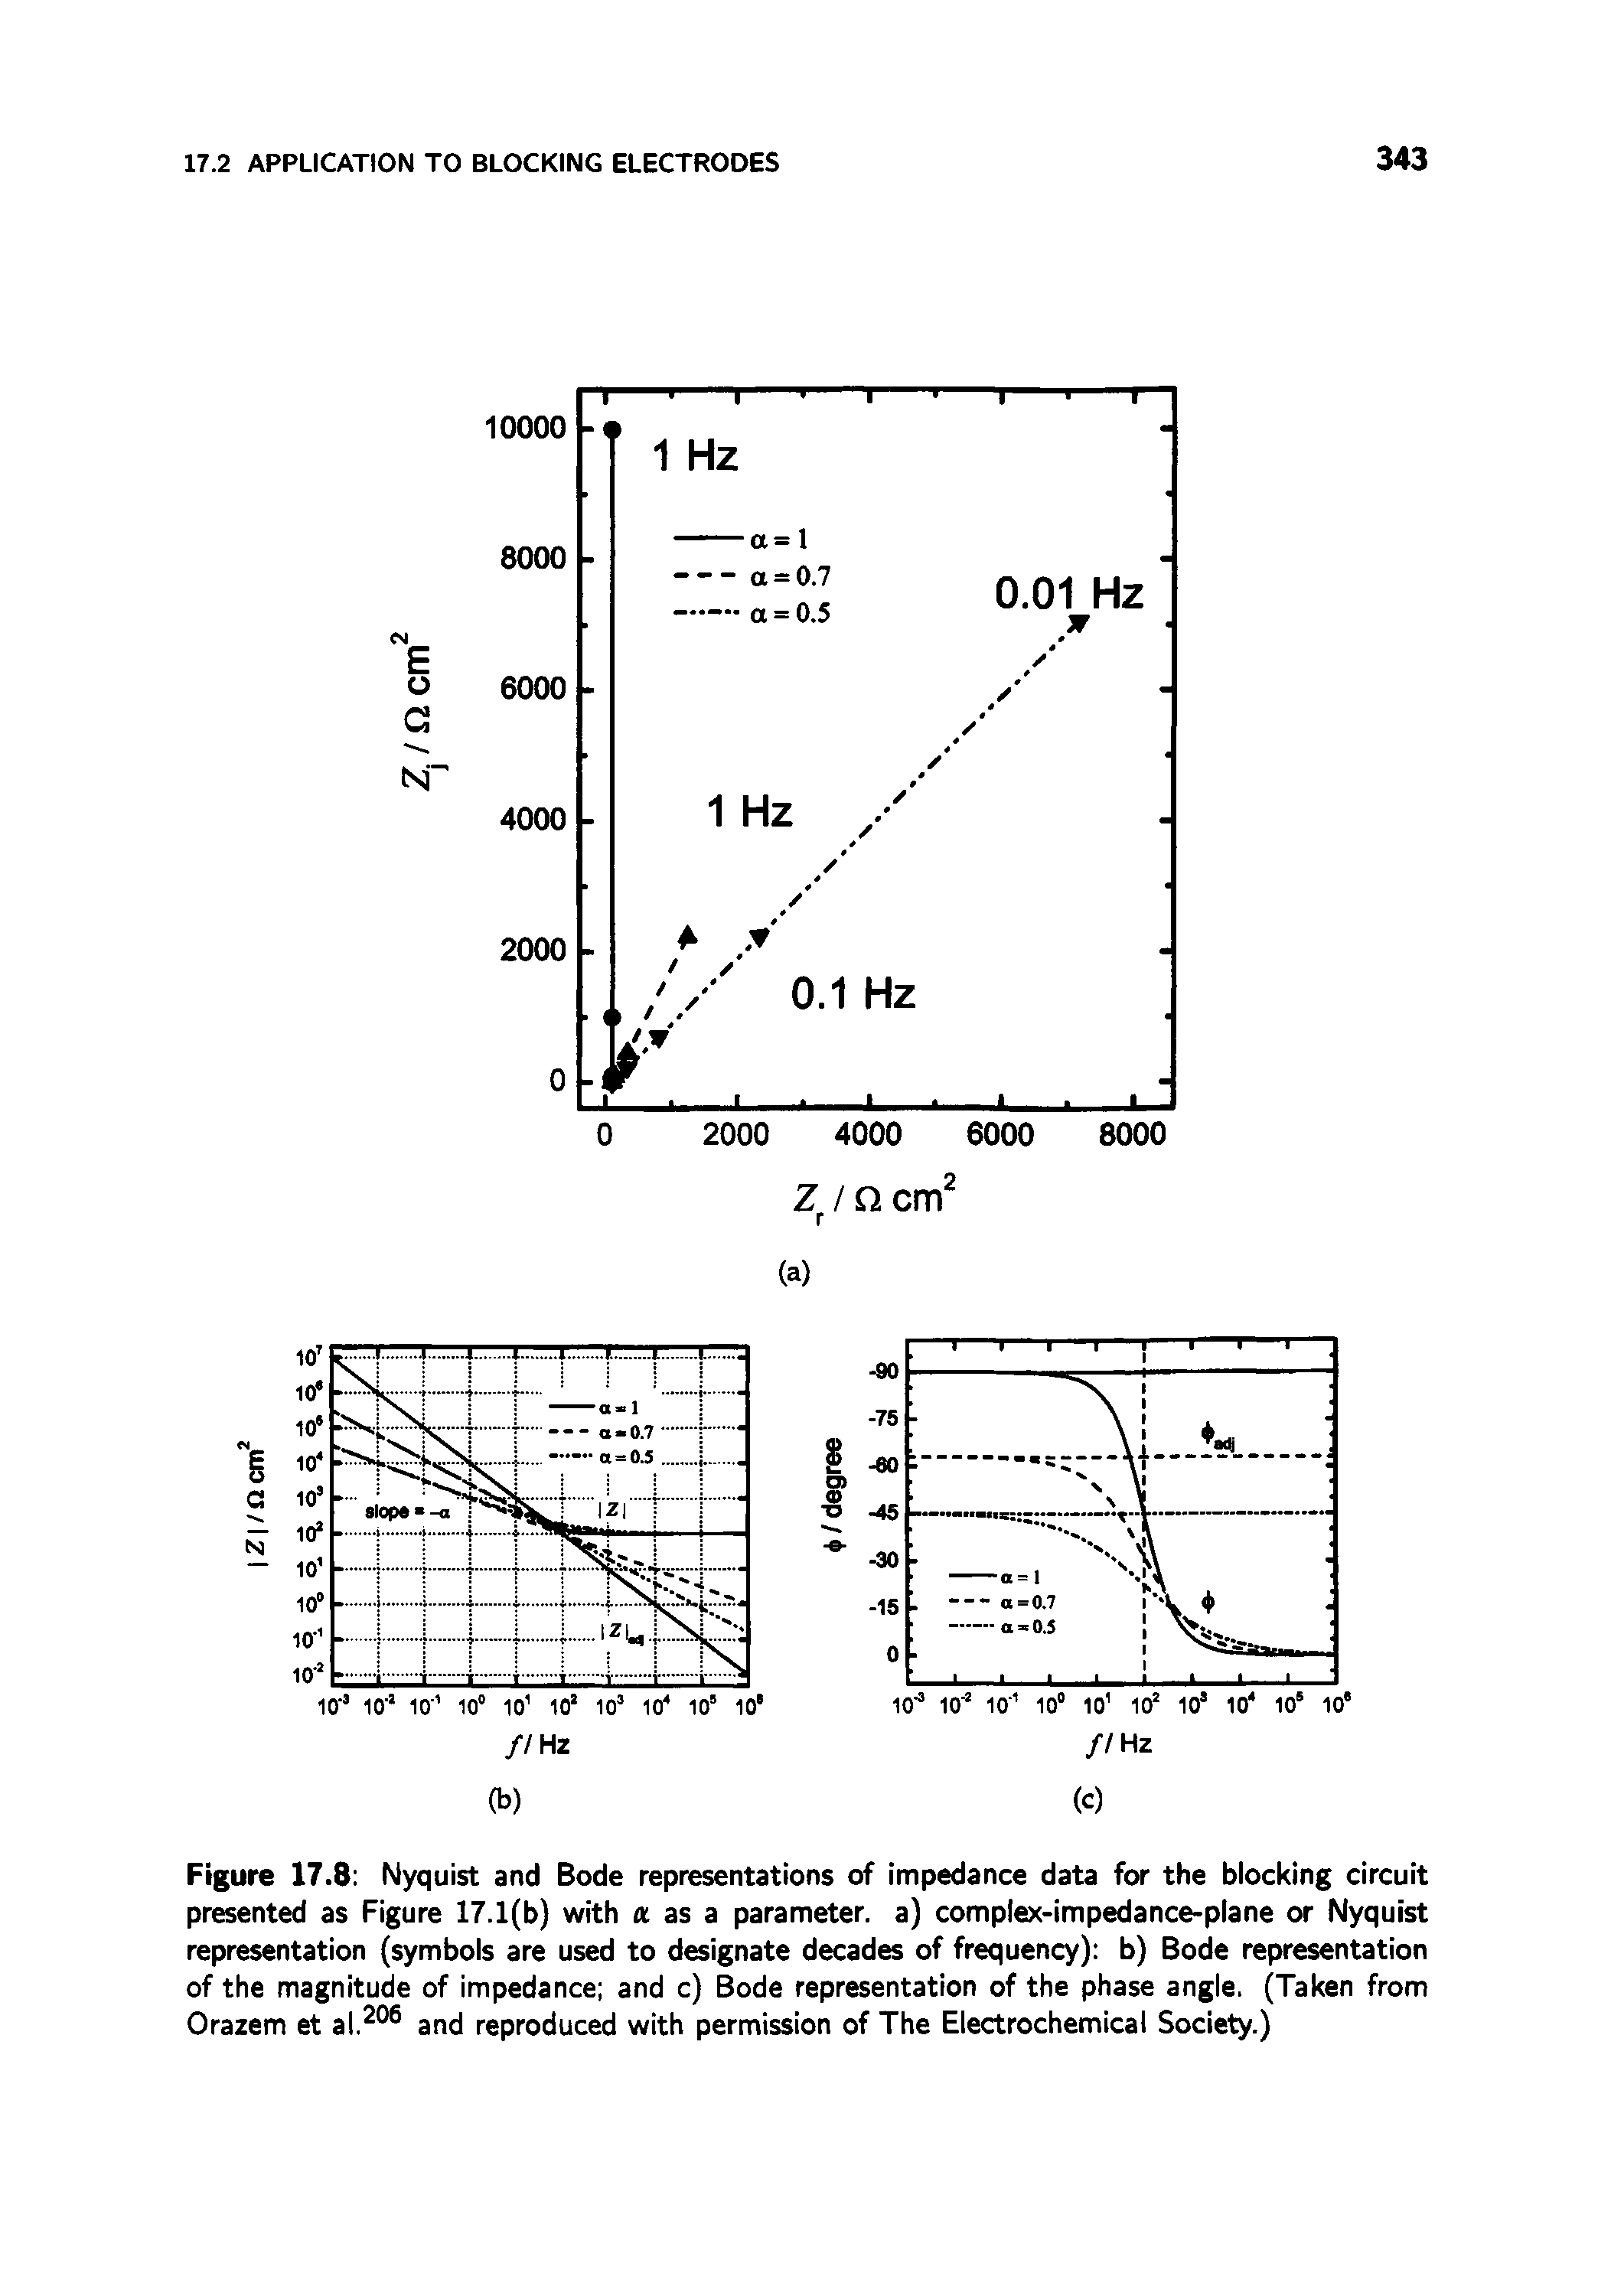 Figure 17.8 Nyquist and Bode representations of impedance data for the blocking circuit presented as Figure 17.1(b) with a as a parameter, a) complex-impedance-plane or Nyquist representation (symbols are used to designate decades of frequency) b) Bode representation of the magnitude of impedance and c) Bode representation of the phase angle. (Taken from Orazem et al. ° and reproduced with permission of The Electrochemical Society.)...